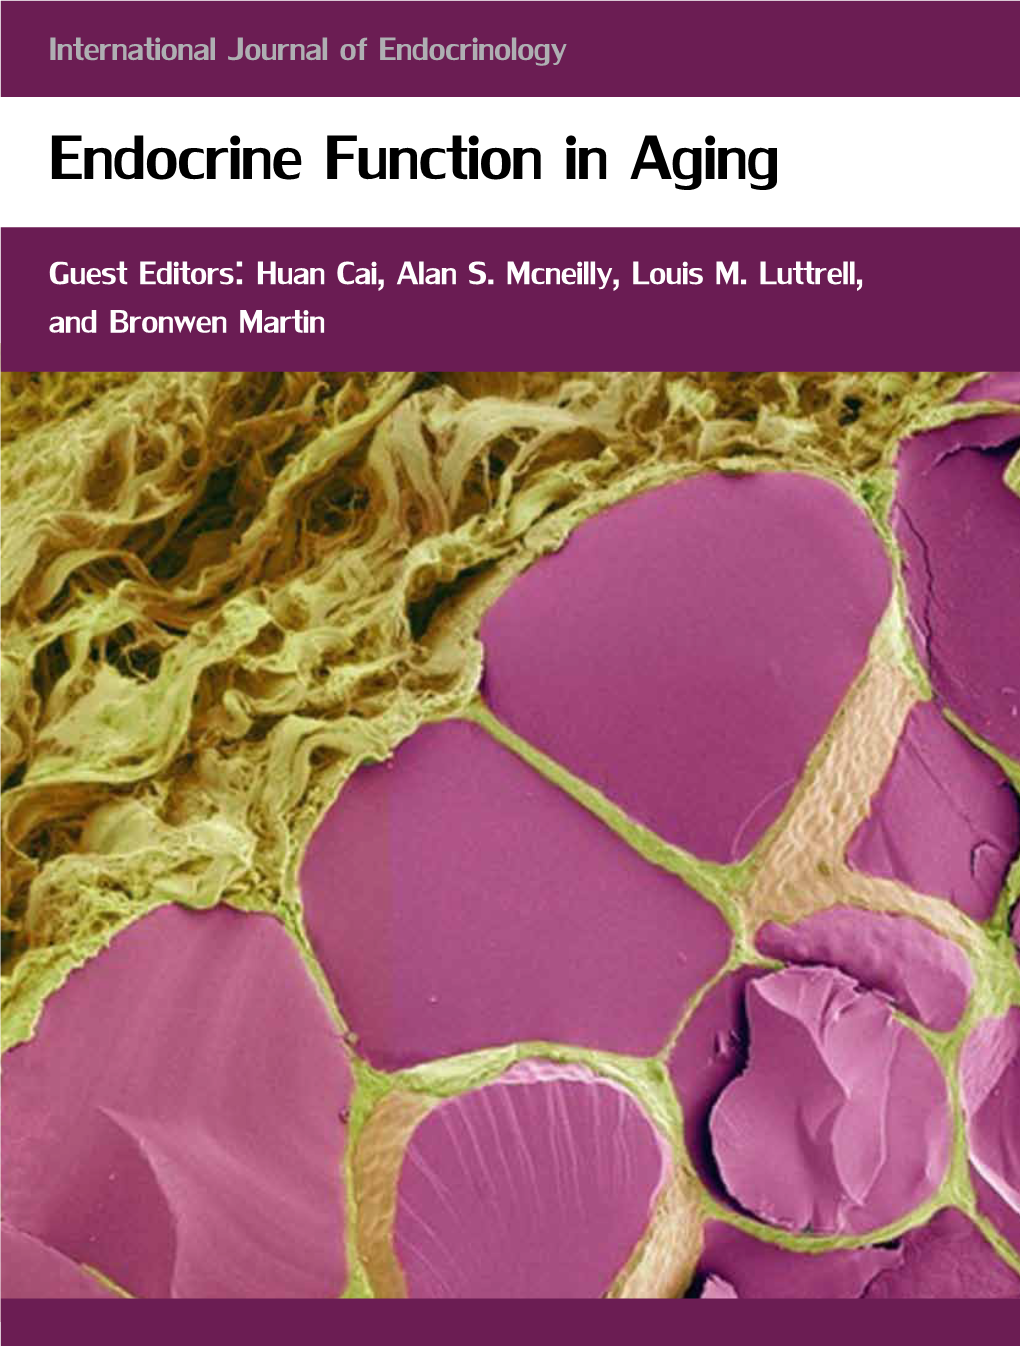 Endocrine Function in Aging Guest Editors: Huan Cai, Alan S